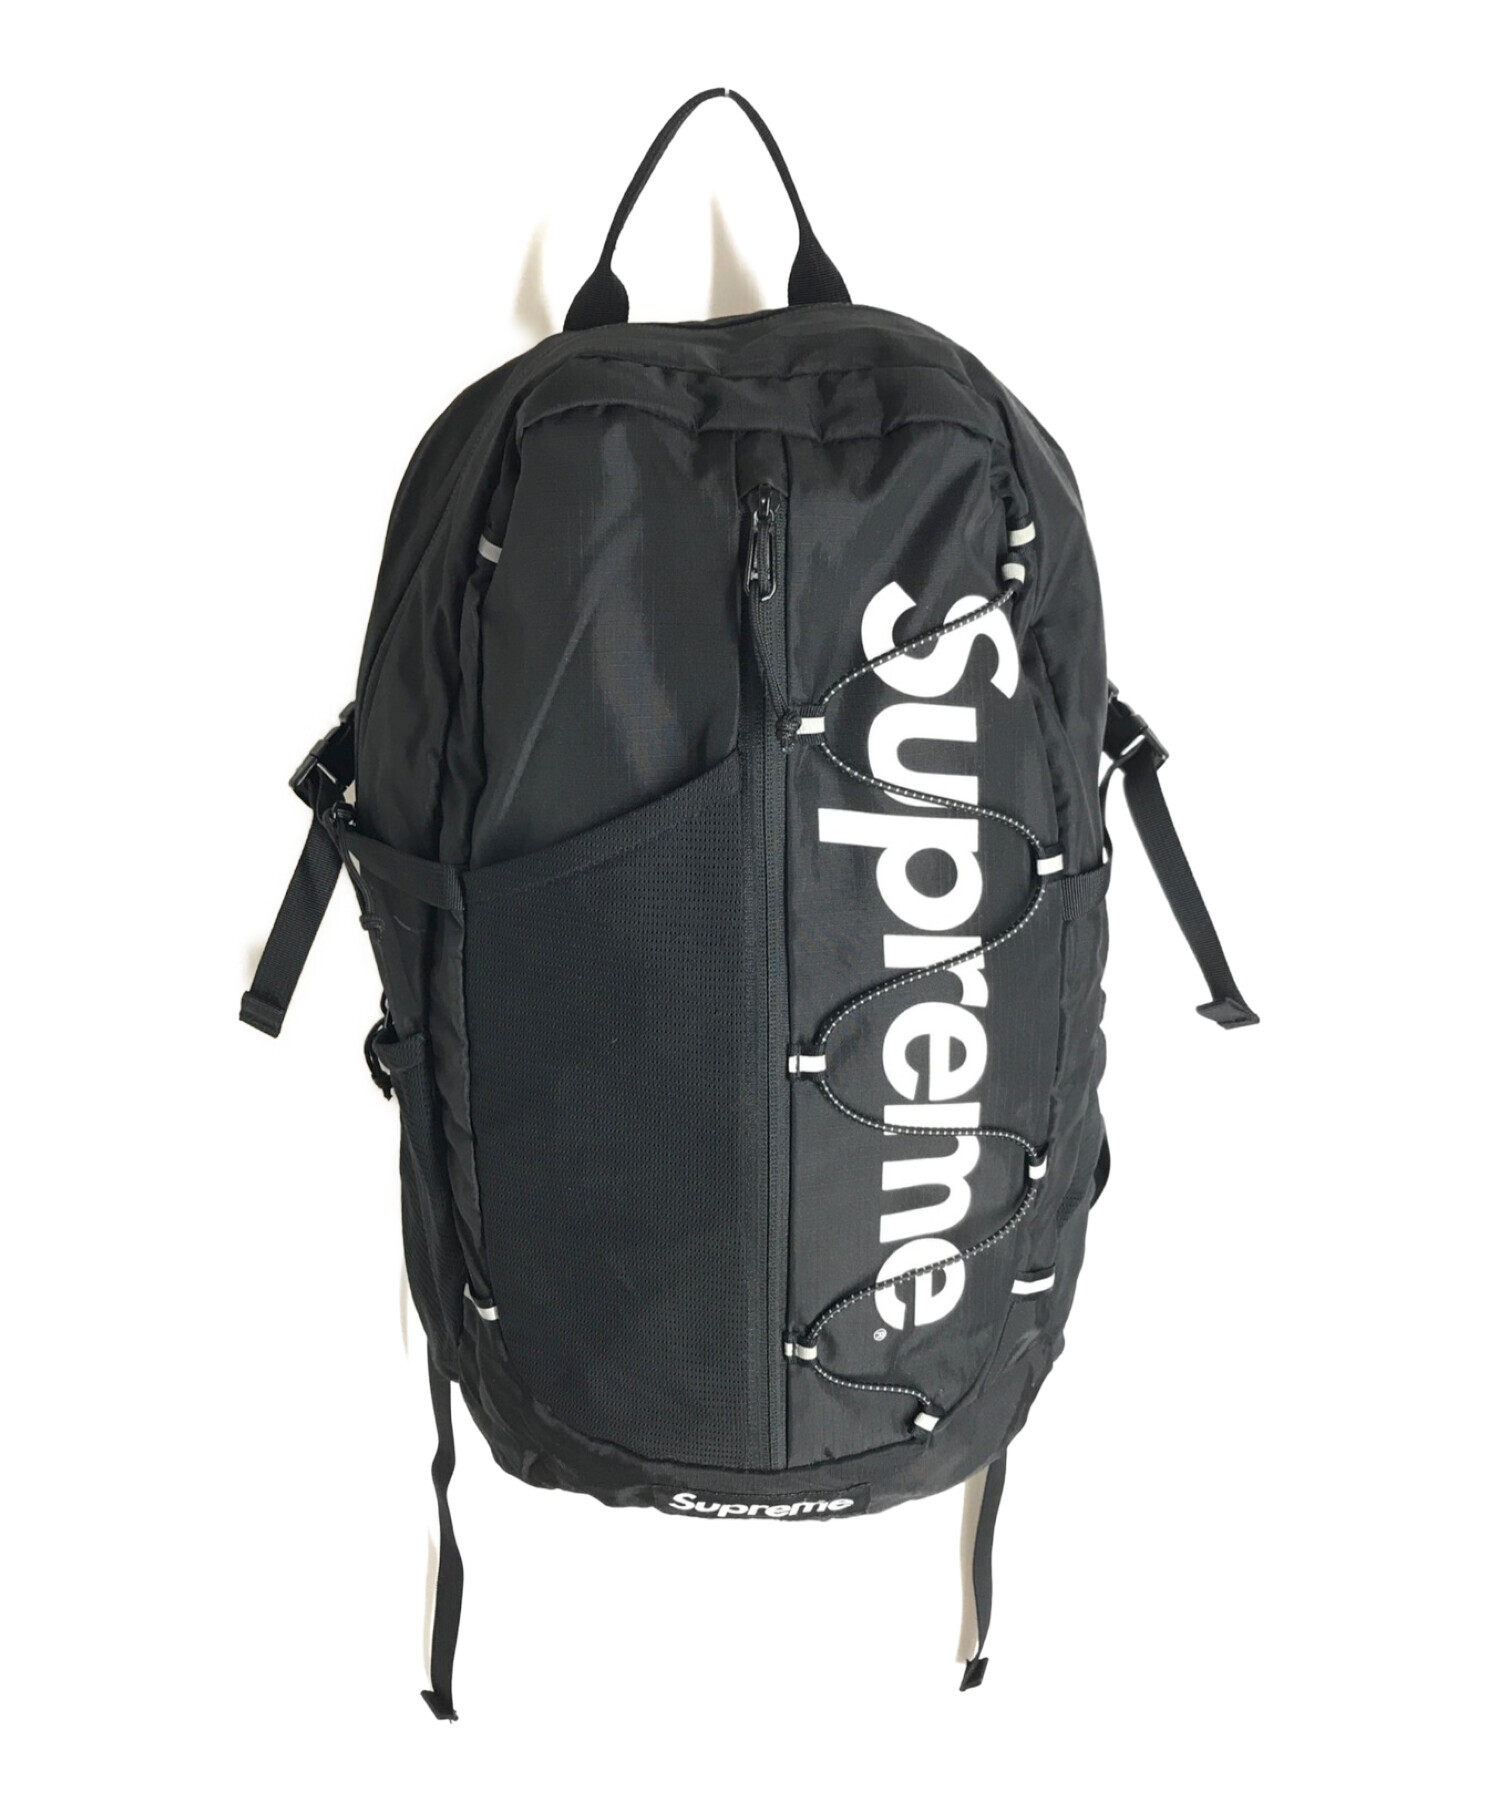 Supreme backpack 黒 2017SSバッグ - バッグパック/リュック